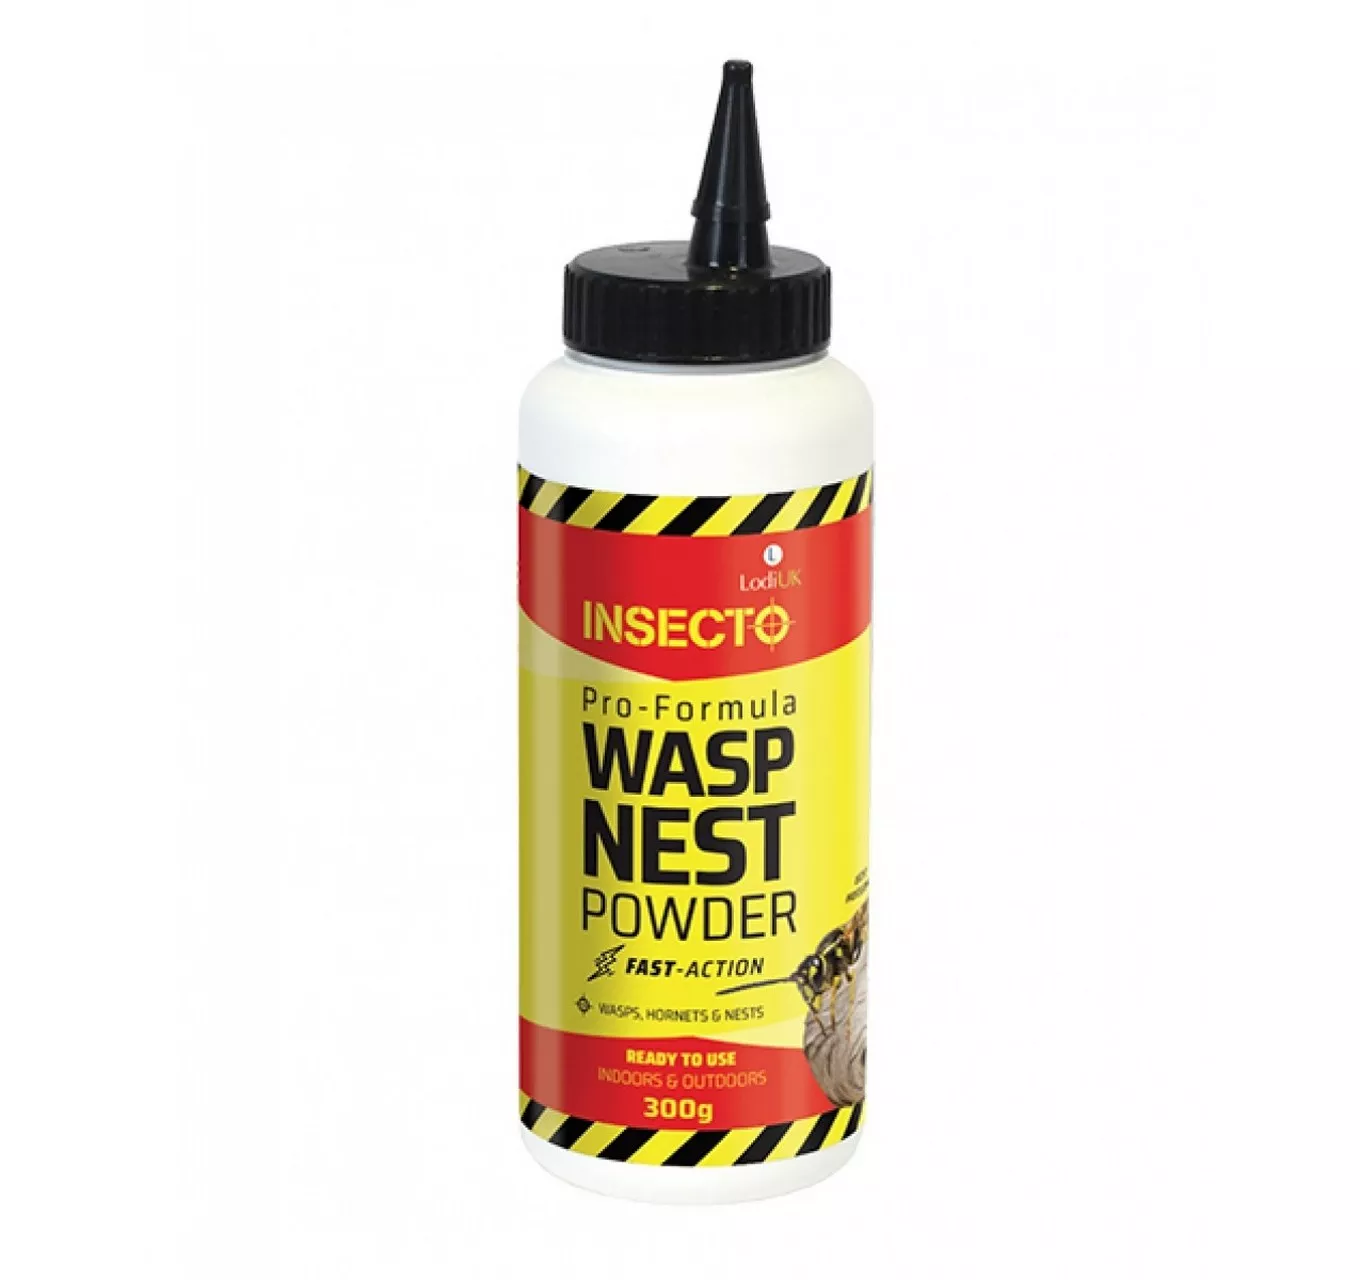 Insecto Wasp Nest Powder 300g